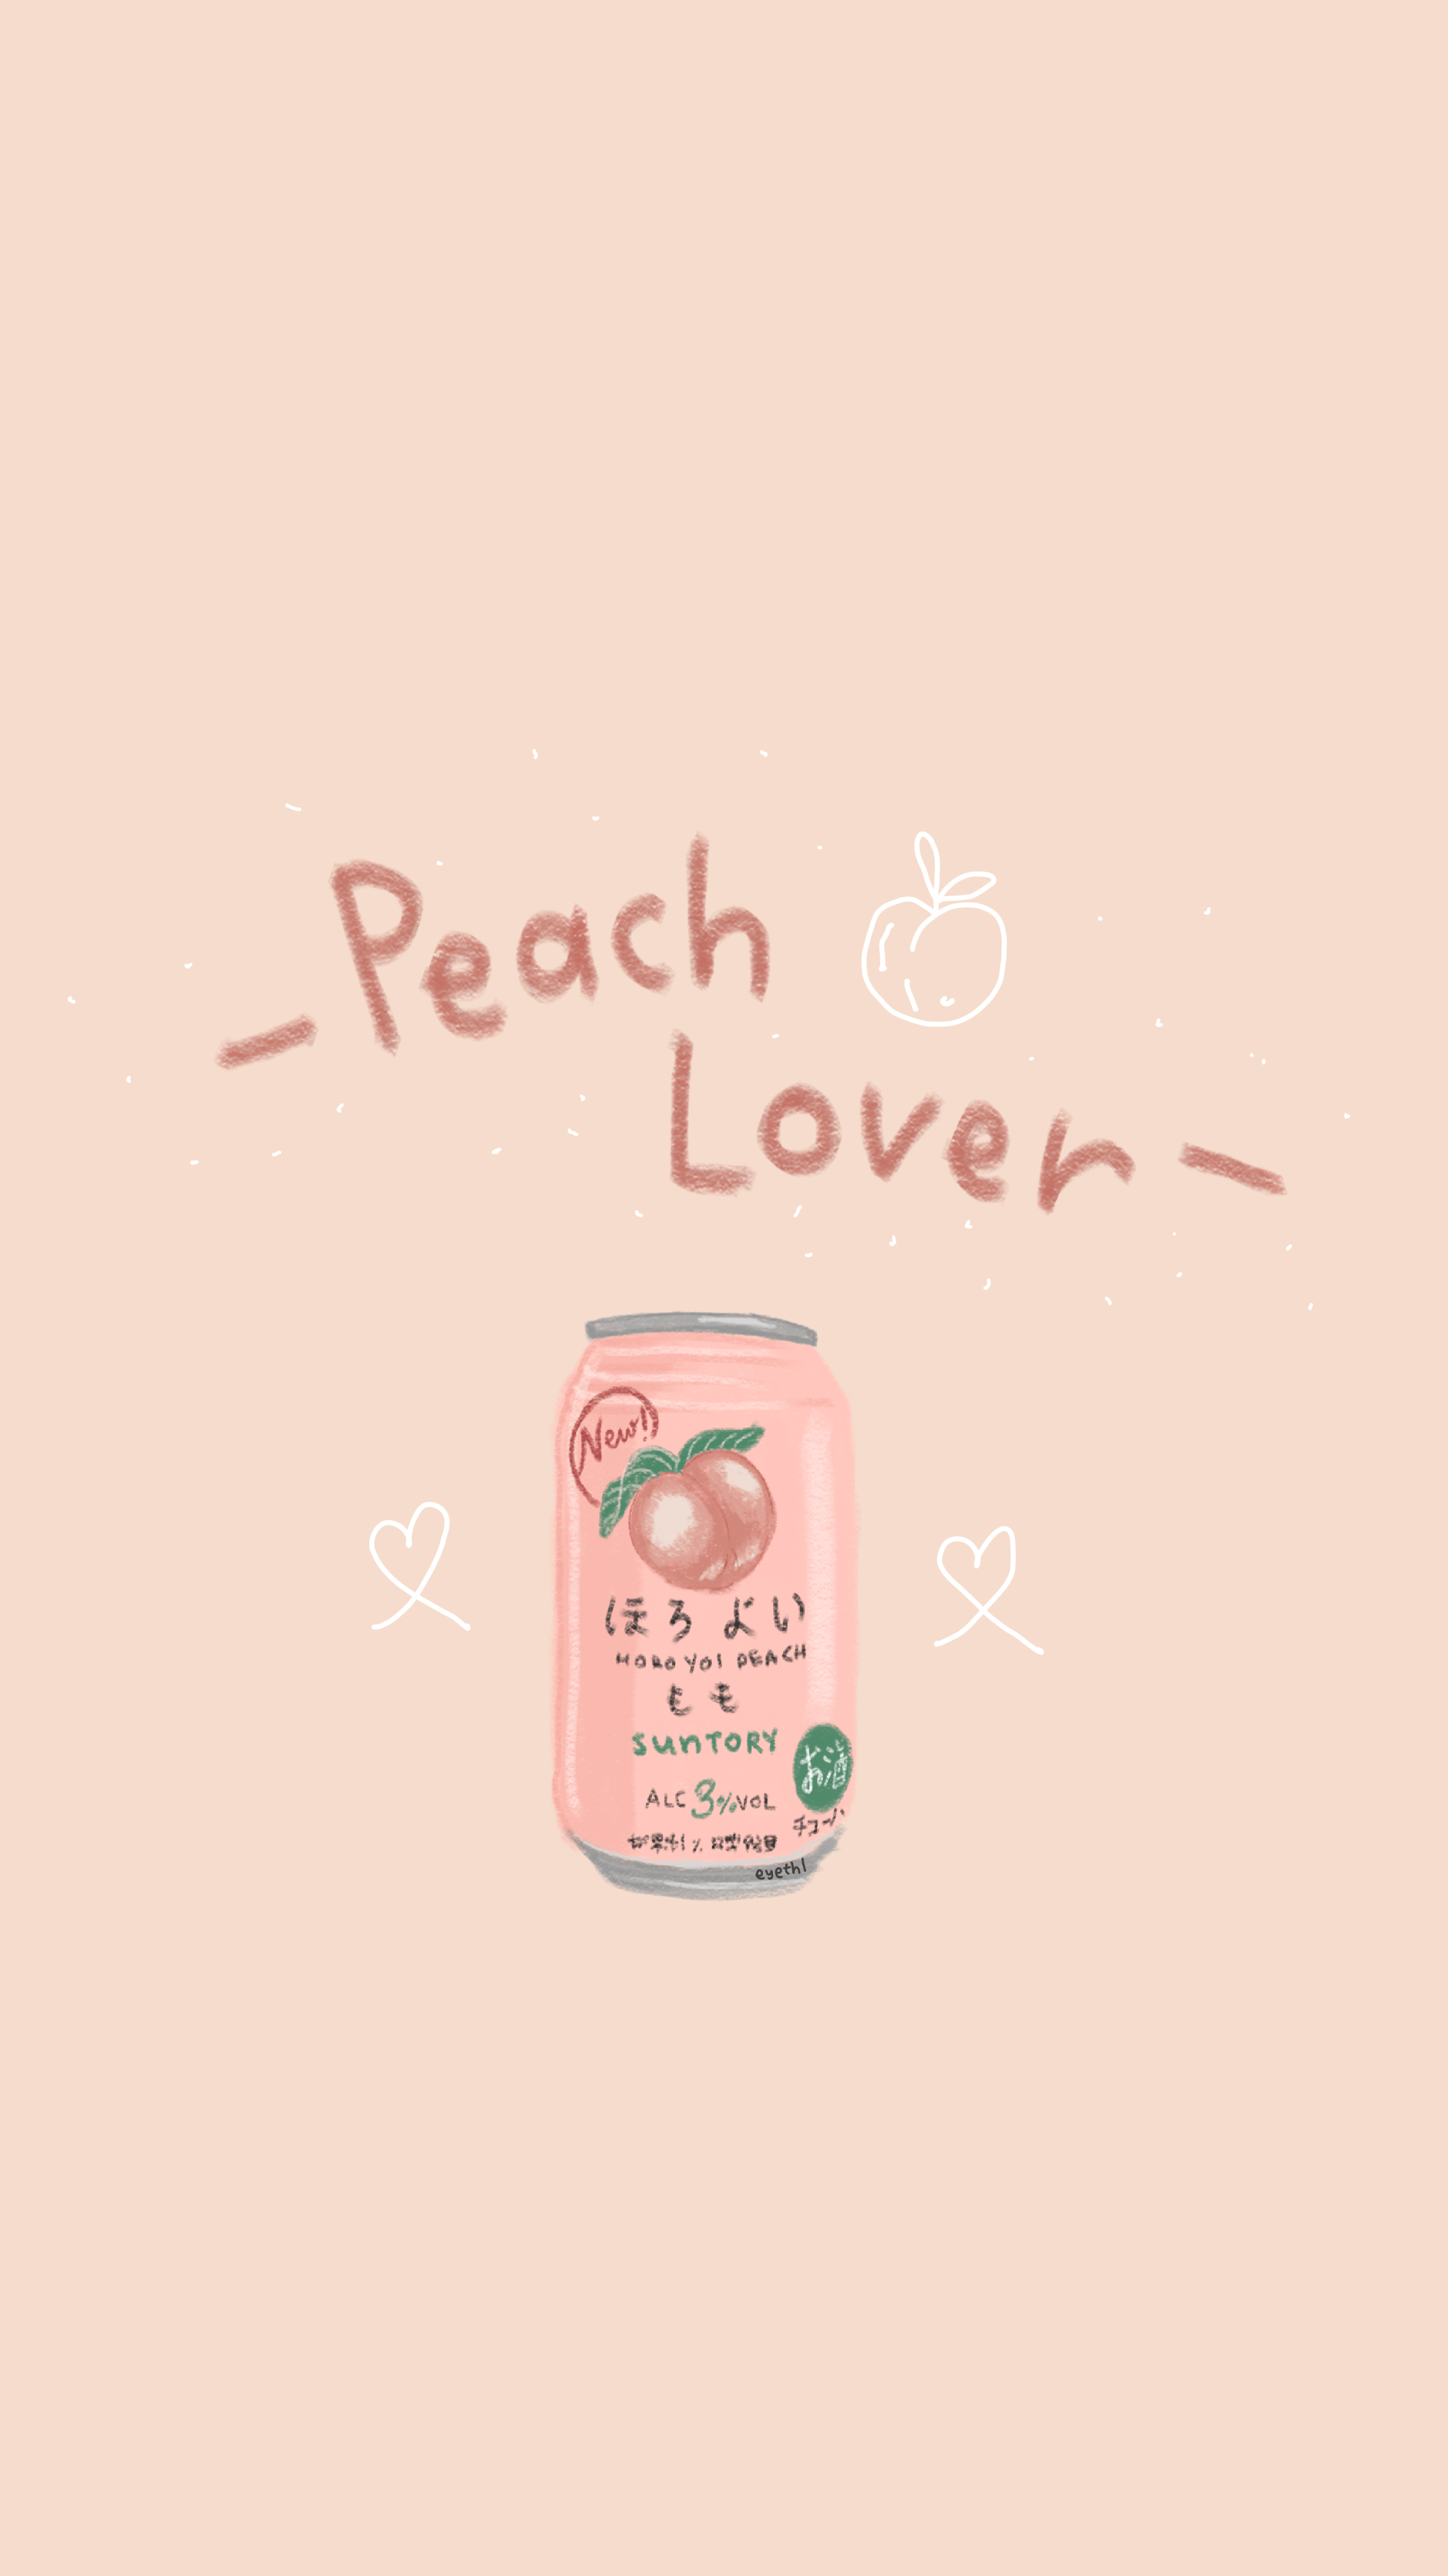 A can of peach lover with hearts on it - Peach